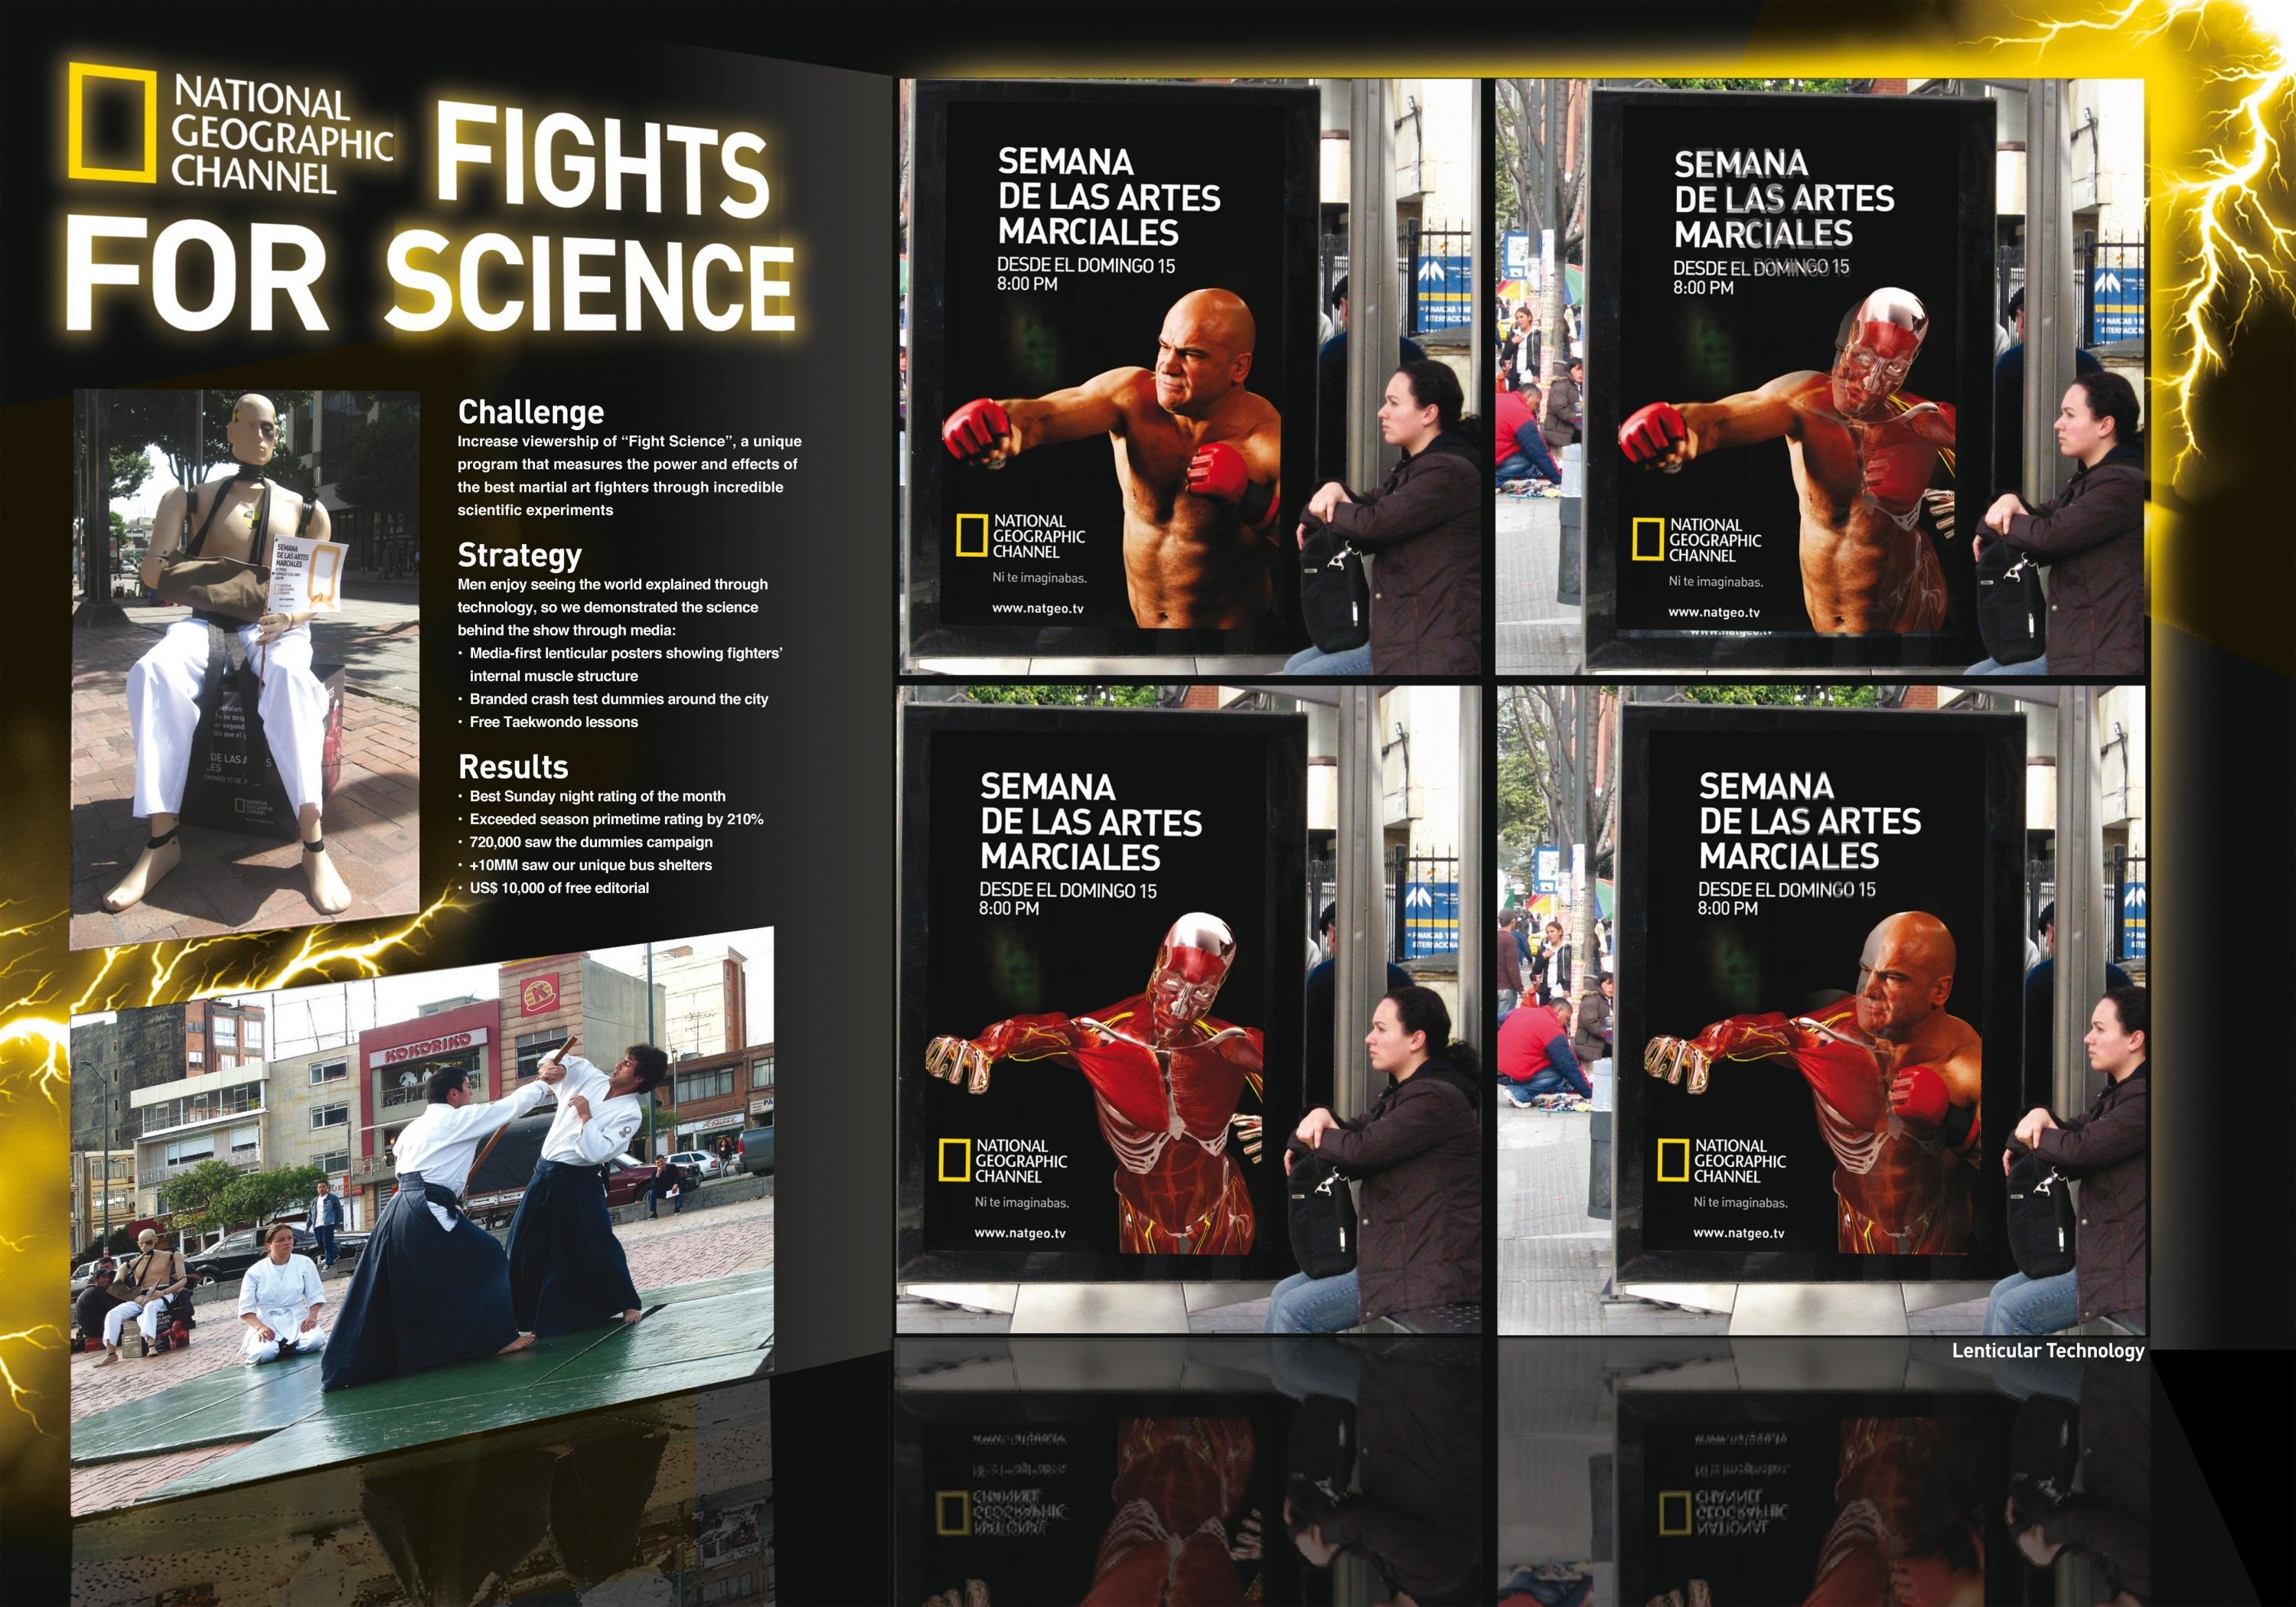 NATIONAL GEOGRAPHIC 'FIGHT SCIENCE' TV SHOW